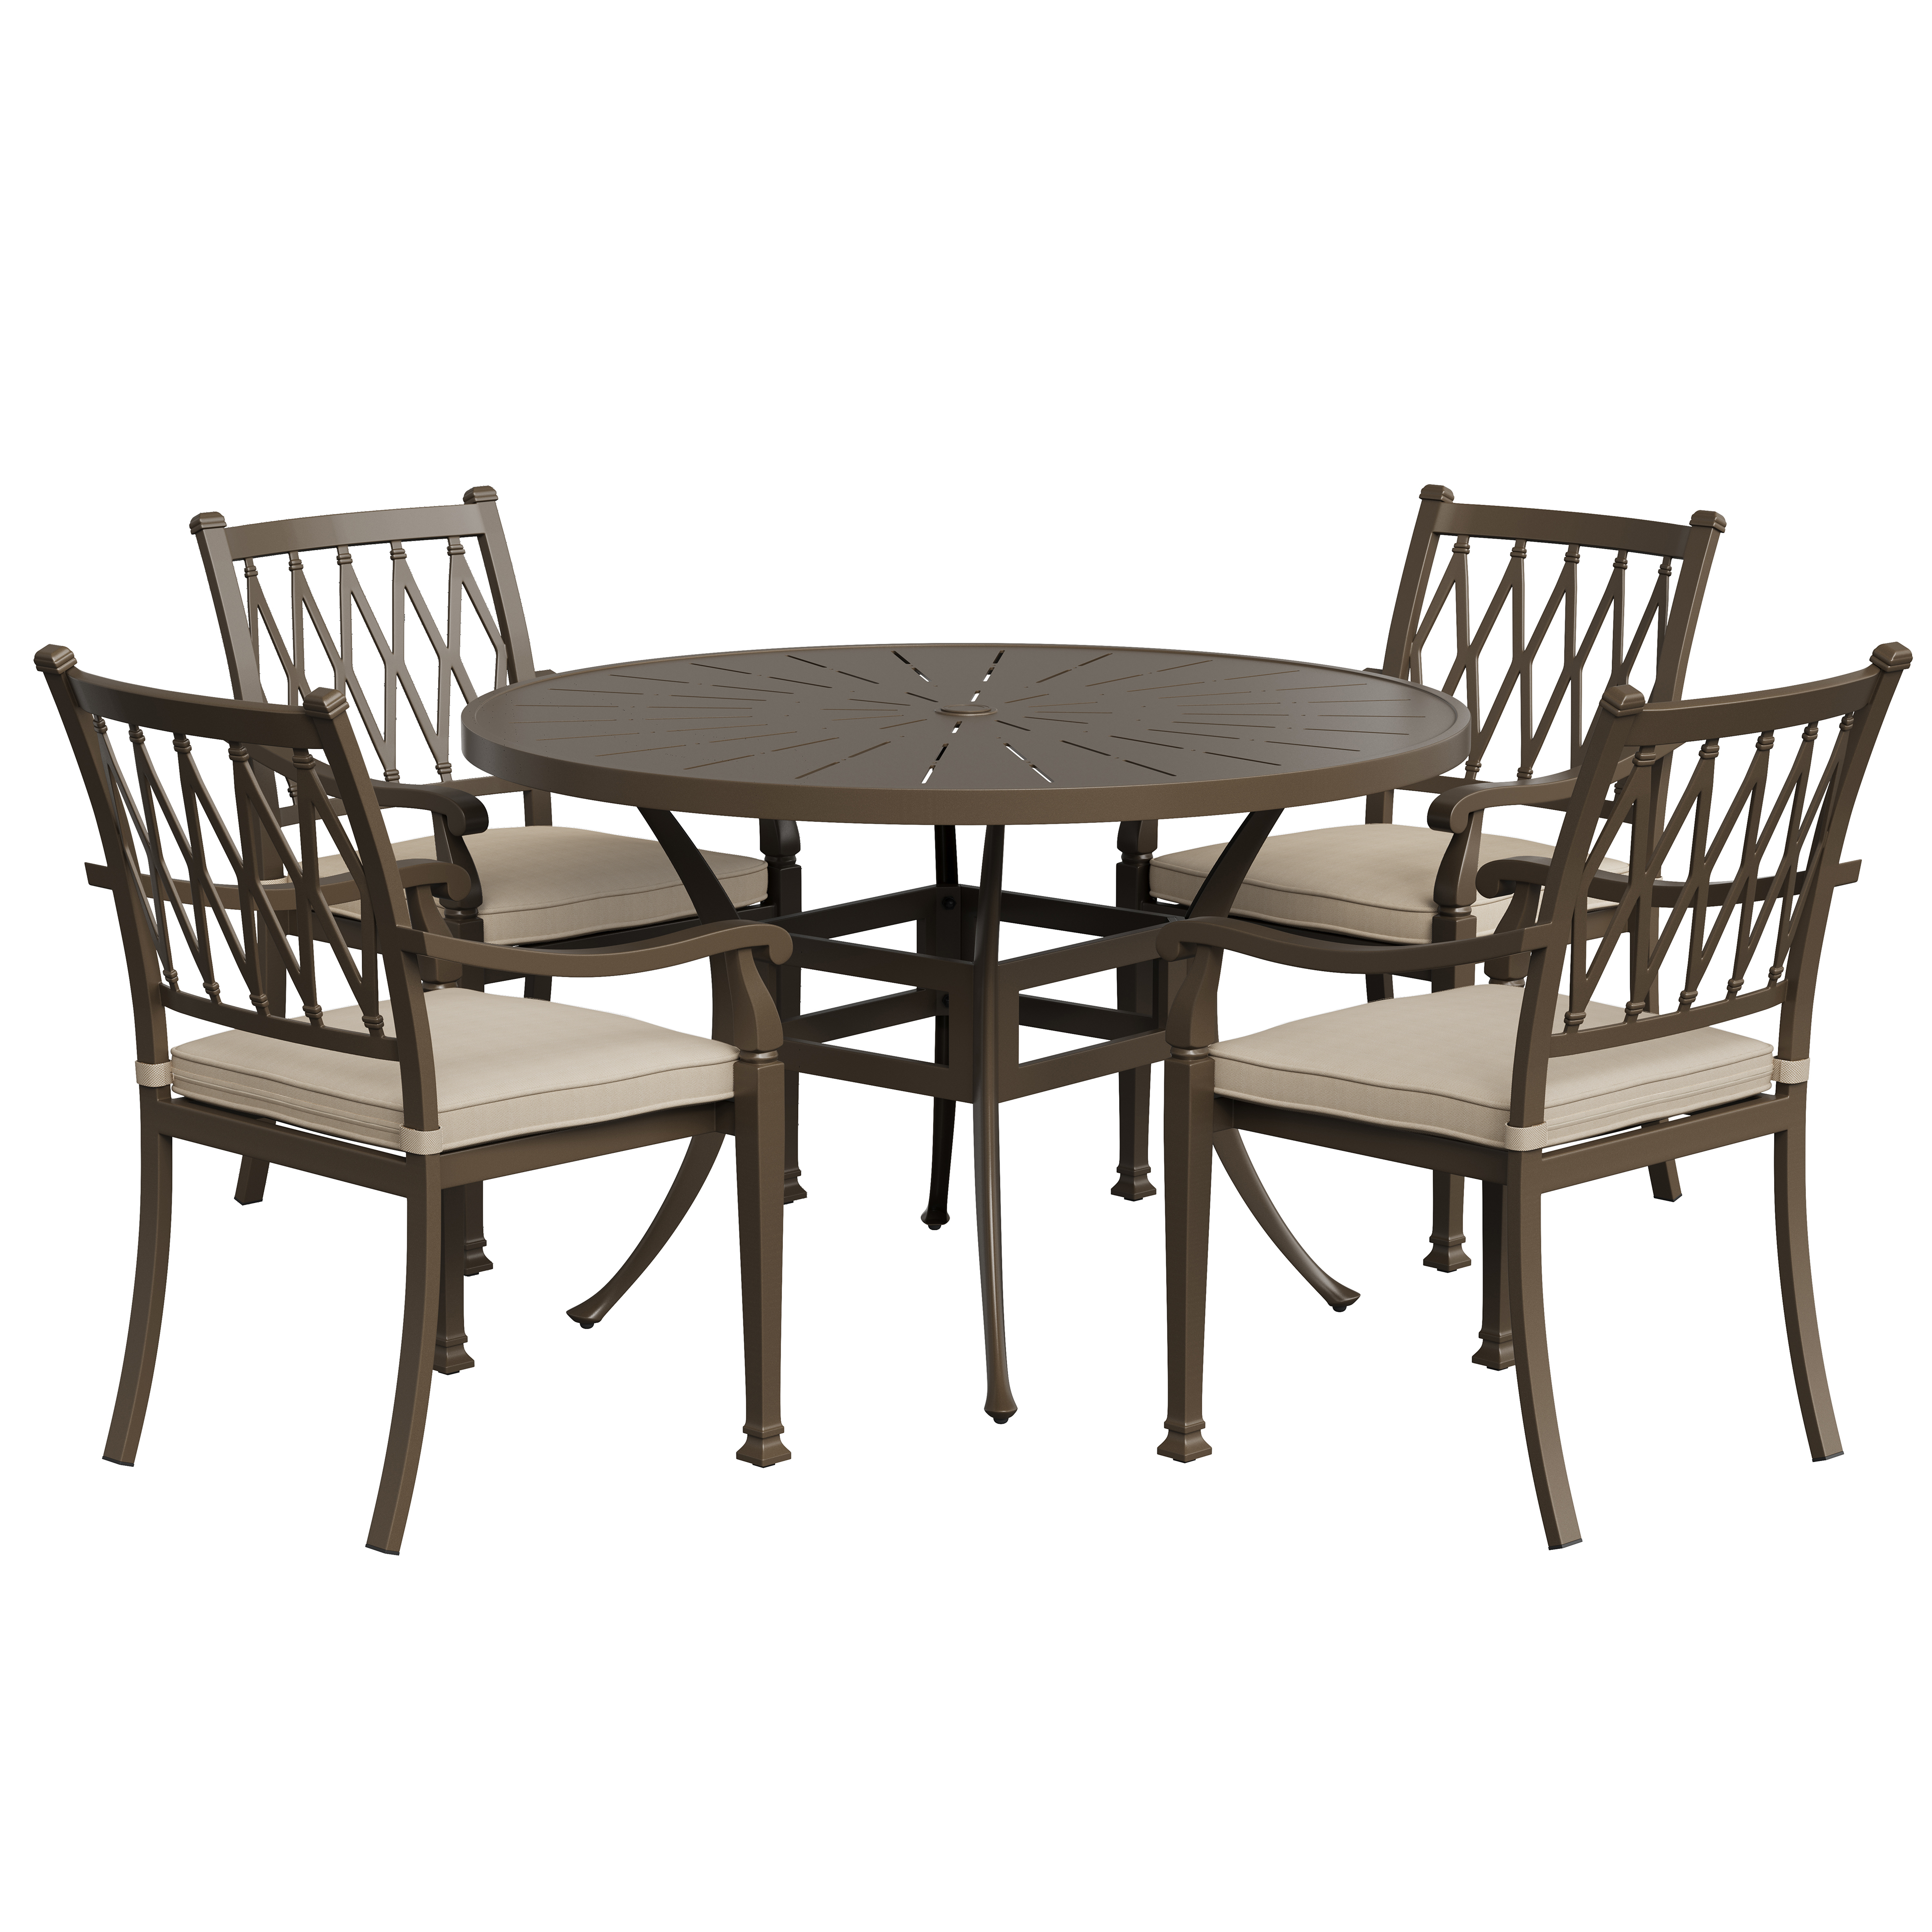 5 Pieces Cast Aluminum Outdoor Dining Set 4 Ergonomic Design Outdoor Chair with Cushions and 1 Round Table with 2.0 Inch Umbrella Hole